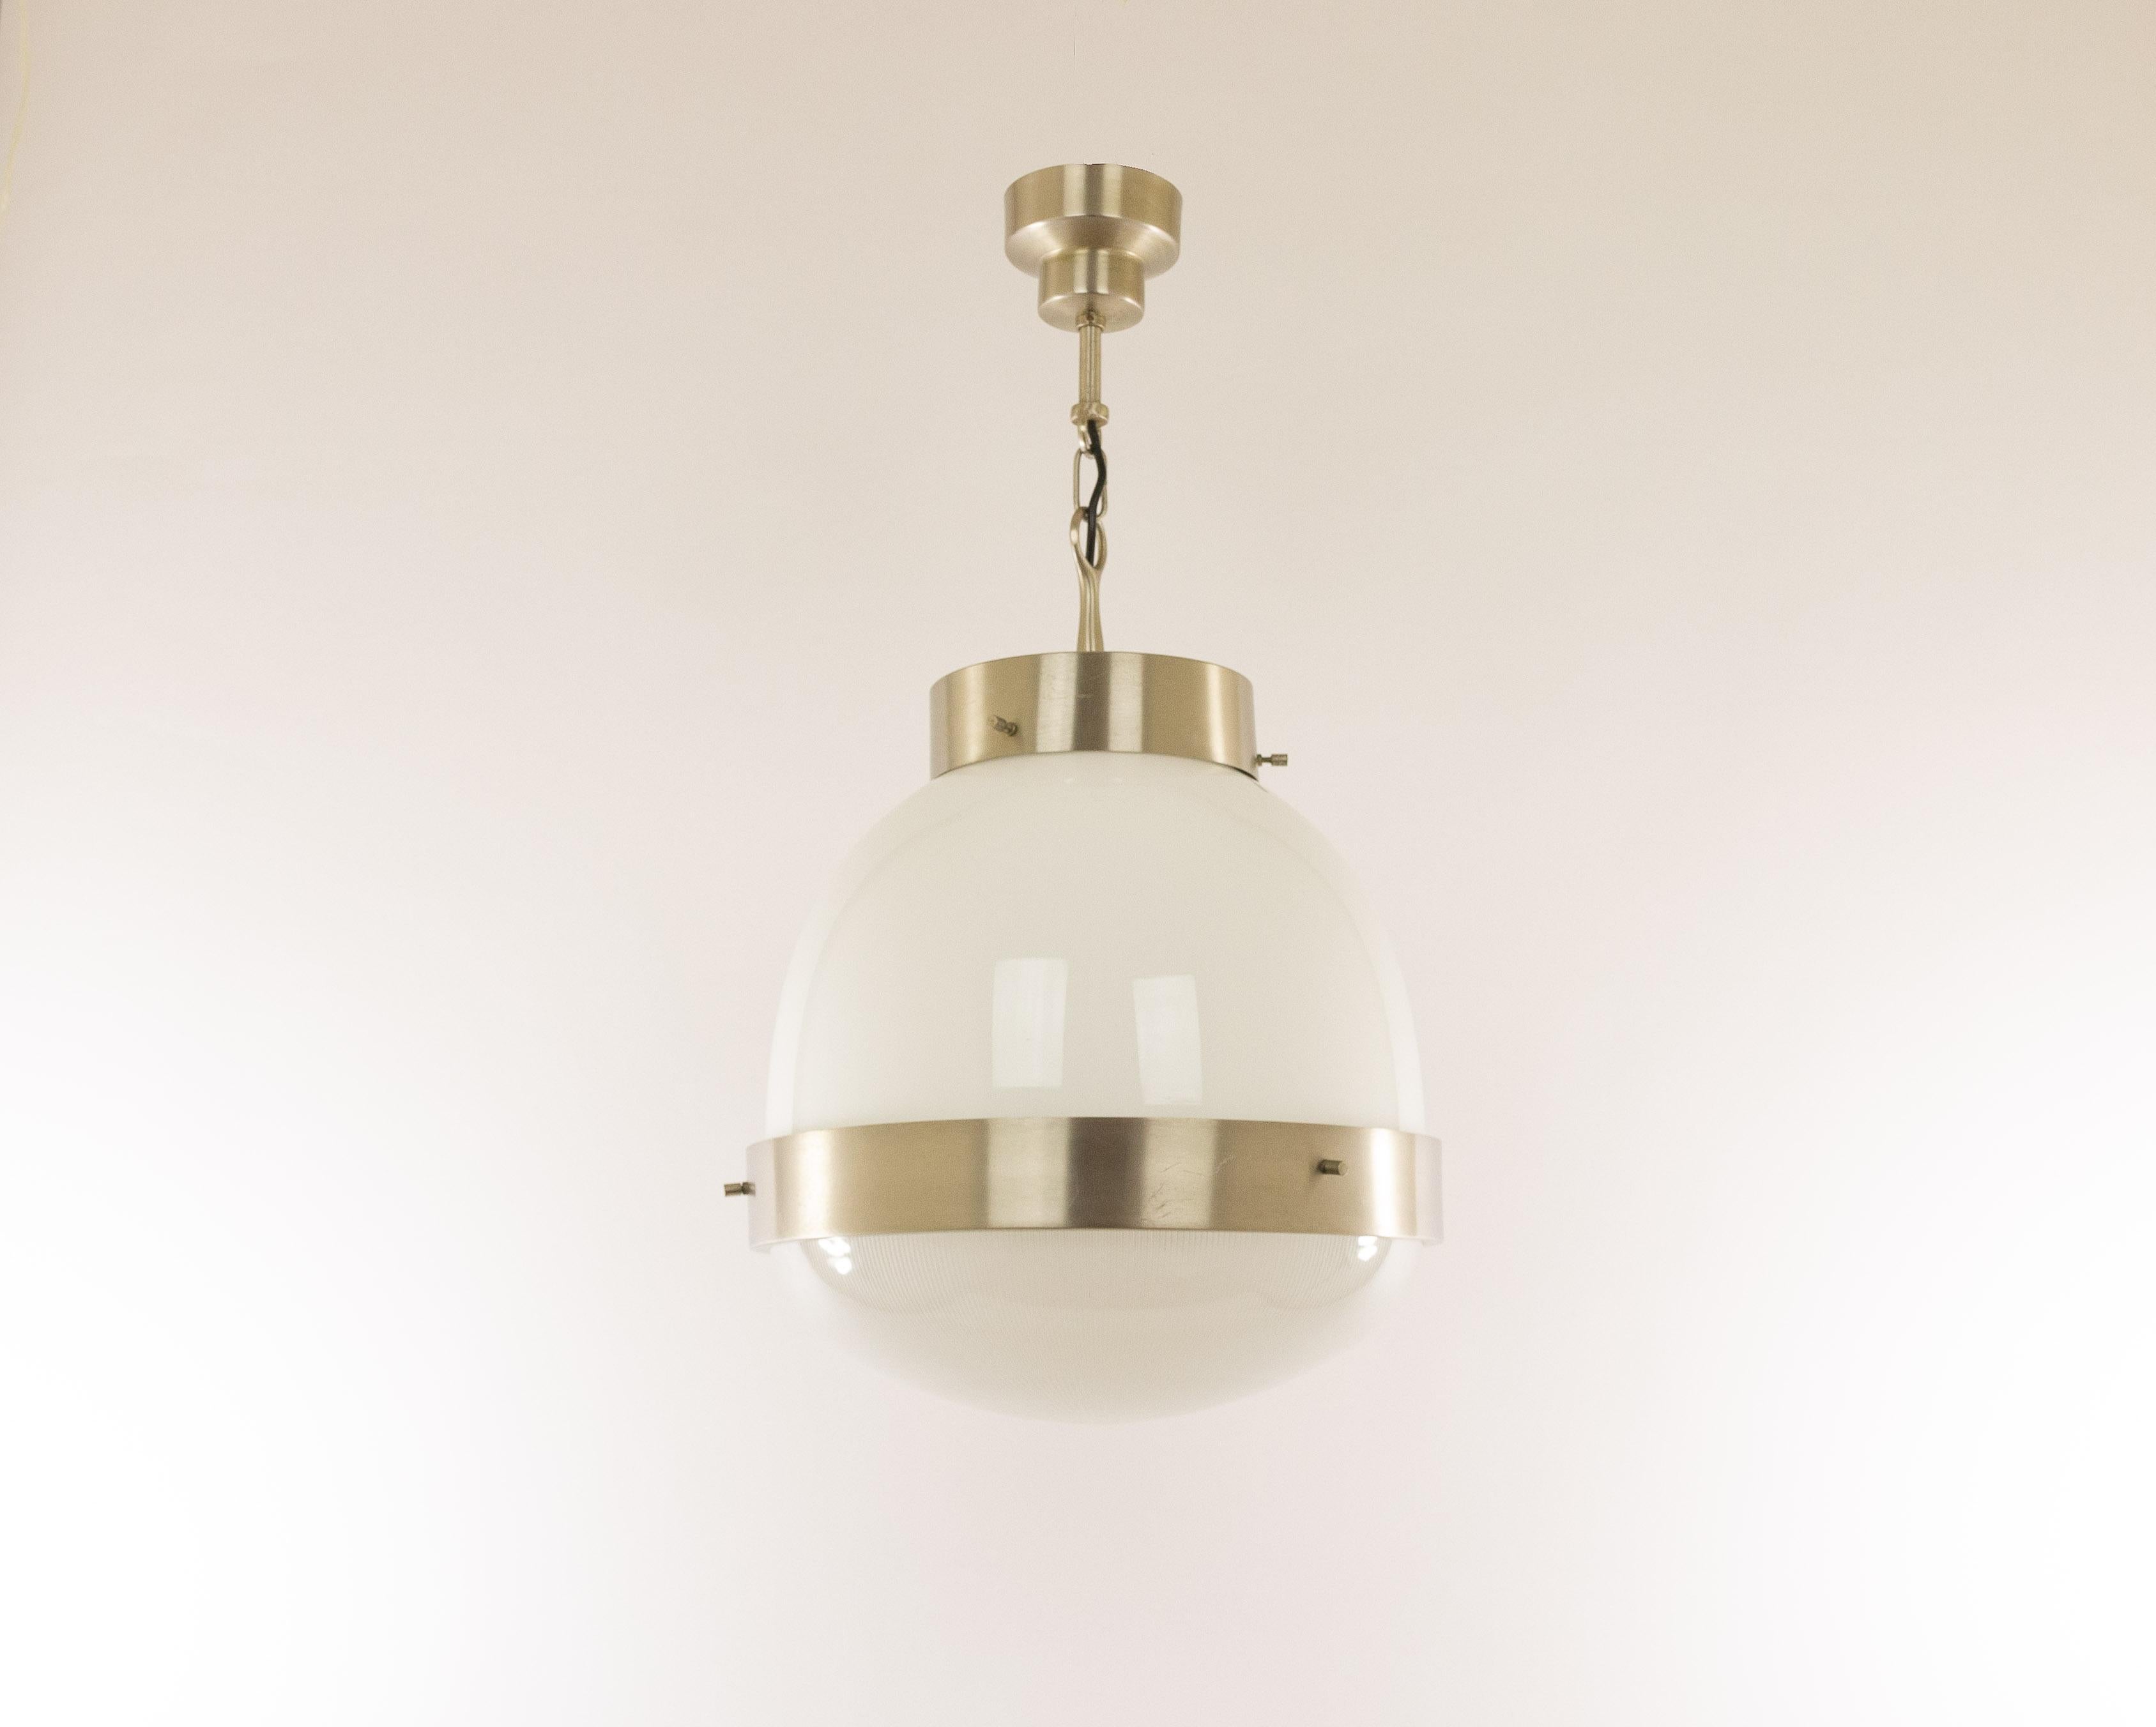 Sergio Mazza designed this Delta Grande pendant for Italian lighting manufacturer Artemide in the 1960s.

The model consists of a pressed crystal bowl and an opaline shade. The structure is from matt nickel-plated brass.

The condition of the